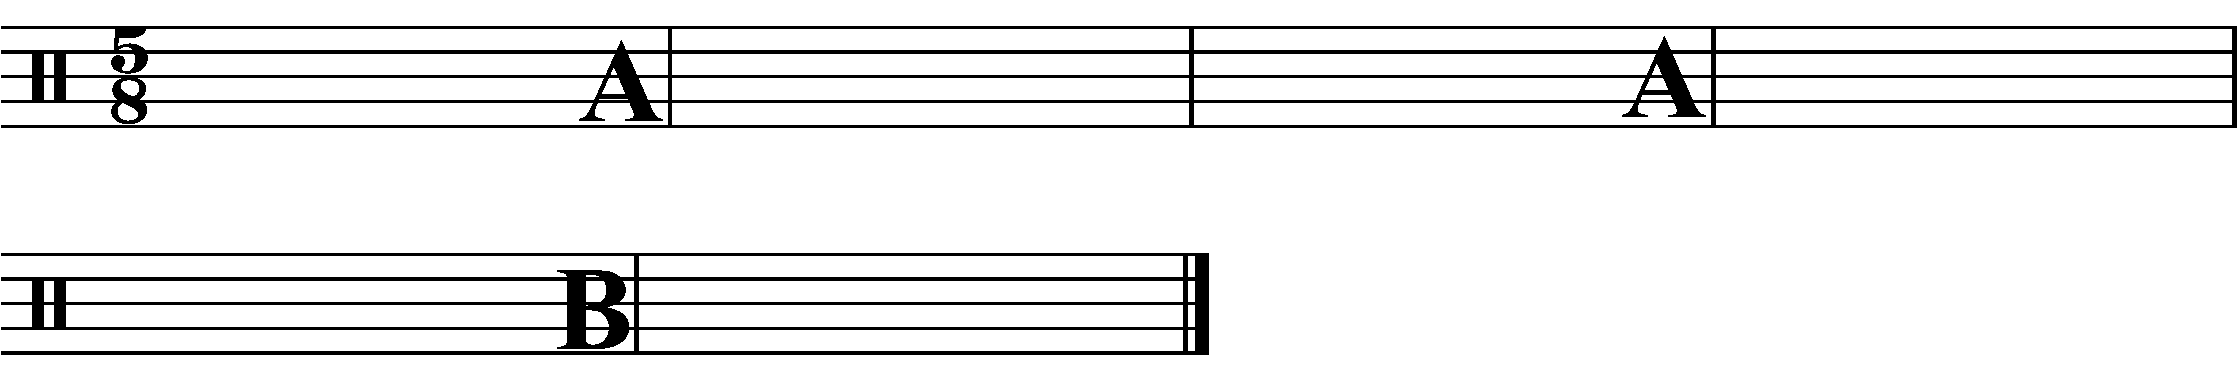 A six bar phrase made up of three 2 bar section.